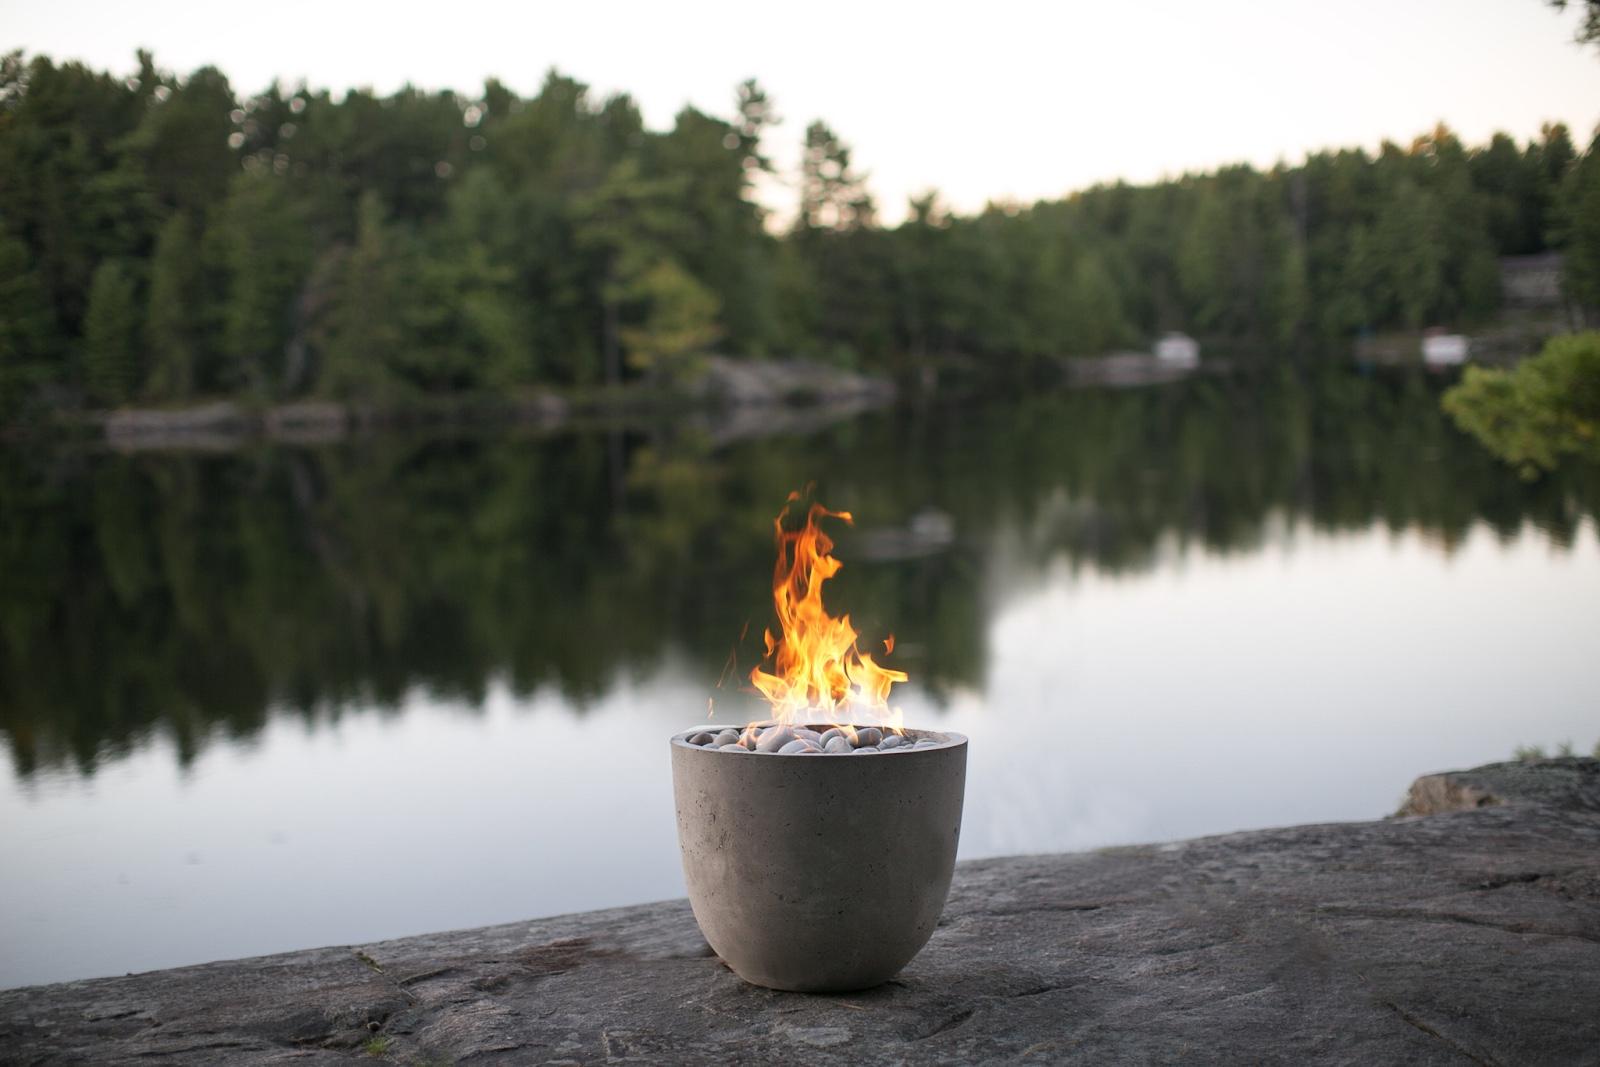 A compact bowl-shaped concrete fire pit from Dekko’s Element collection pictured on a slab of rock in front of a lake at twilight, with a forest in the distance.